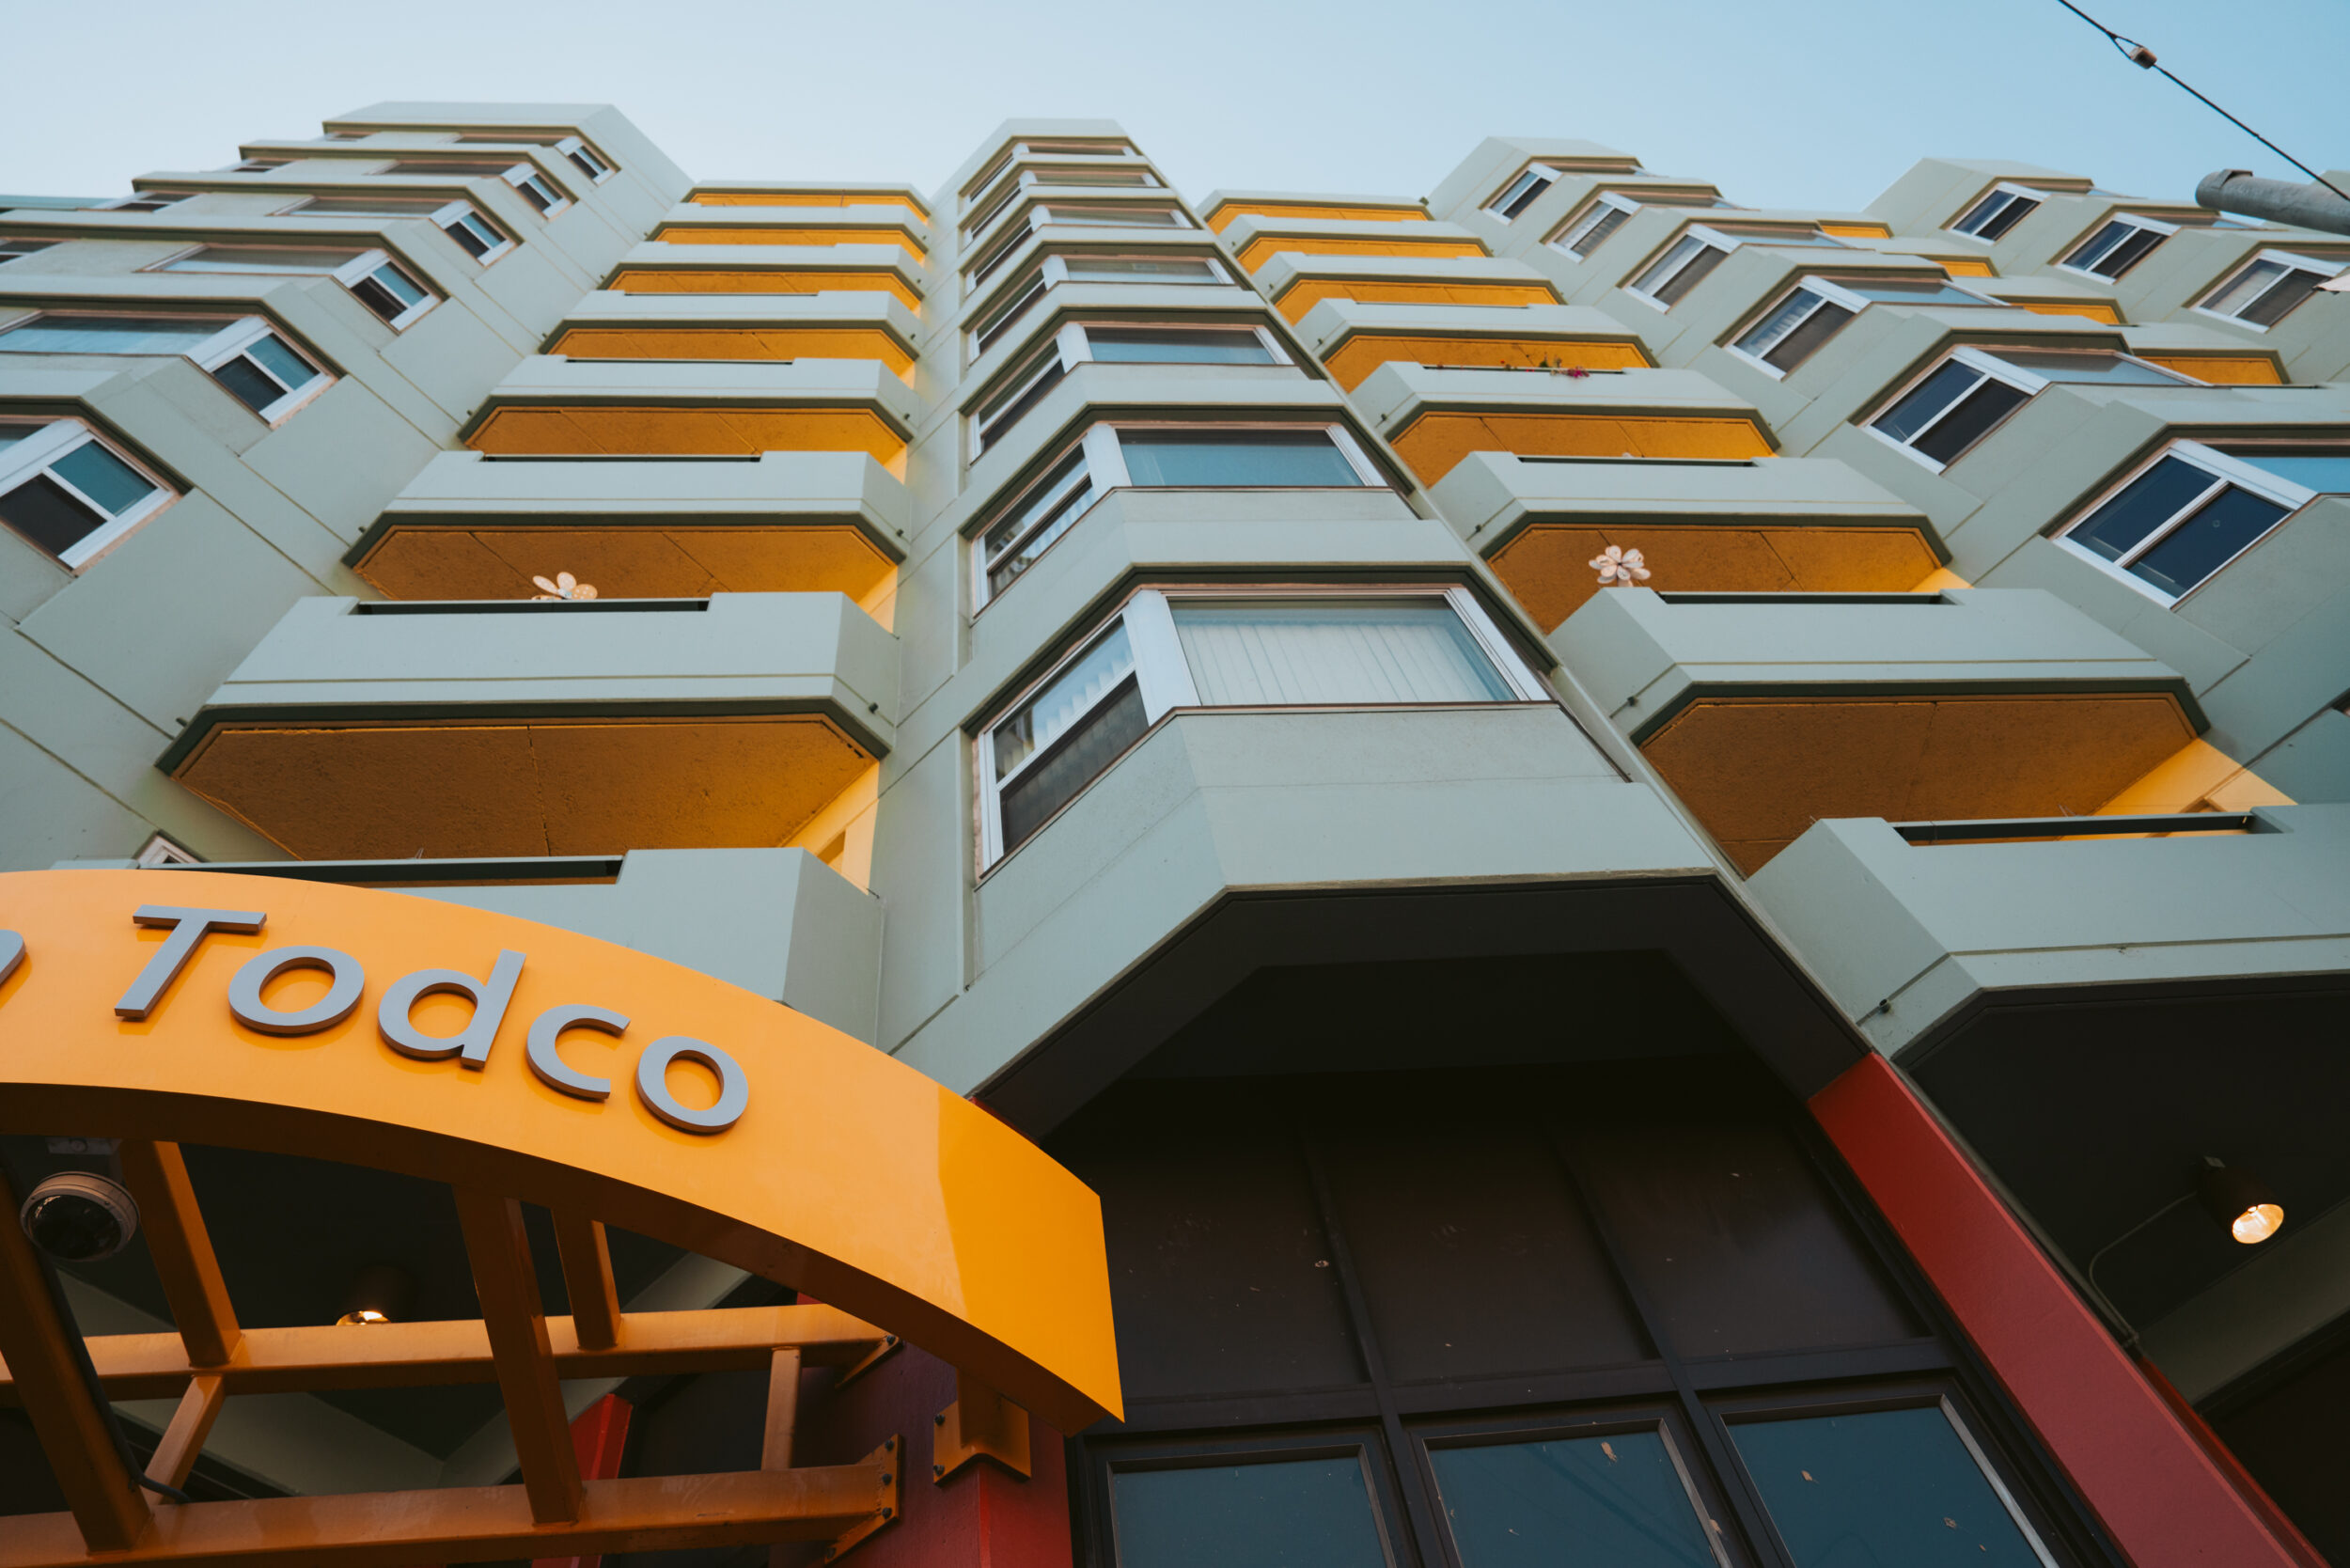 A colorful building facade with staggered balconies, under a clear sky, marked &quot;Todco&quot; on an orange overhang.